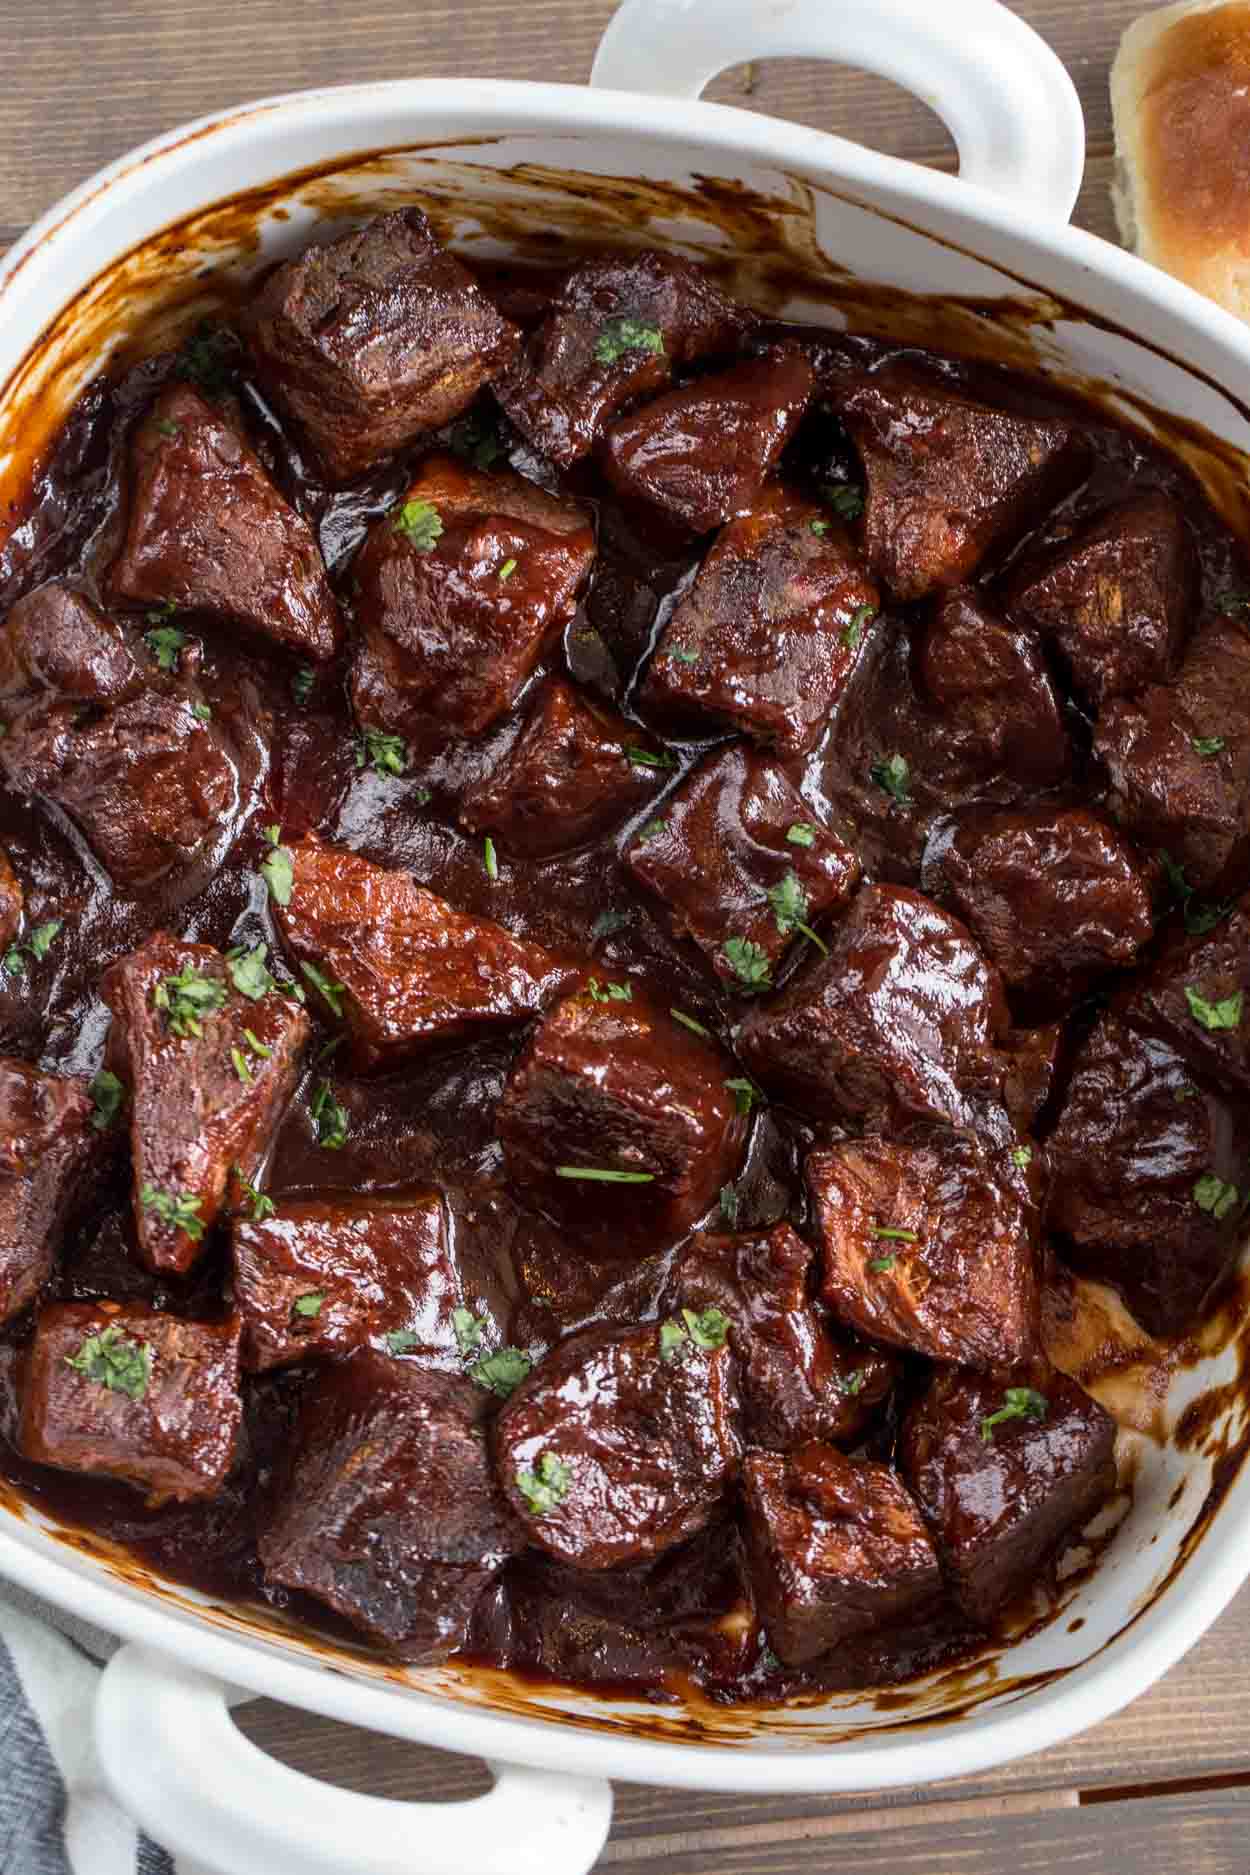 BBQ Crockpot Roast with a tangy barbecue sauce, topped with greens.